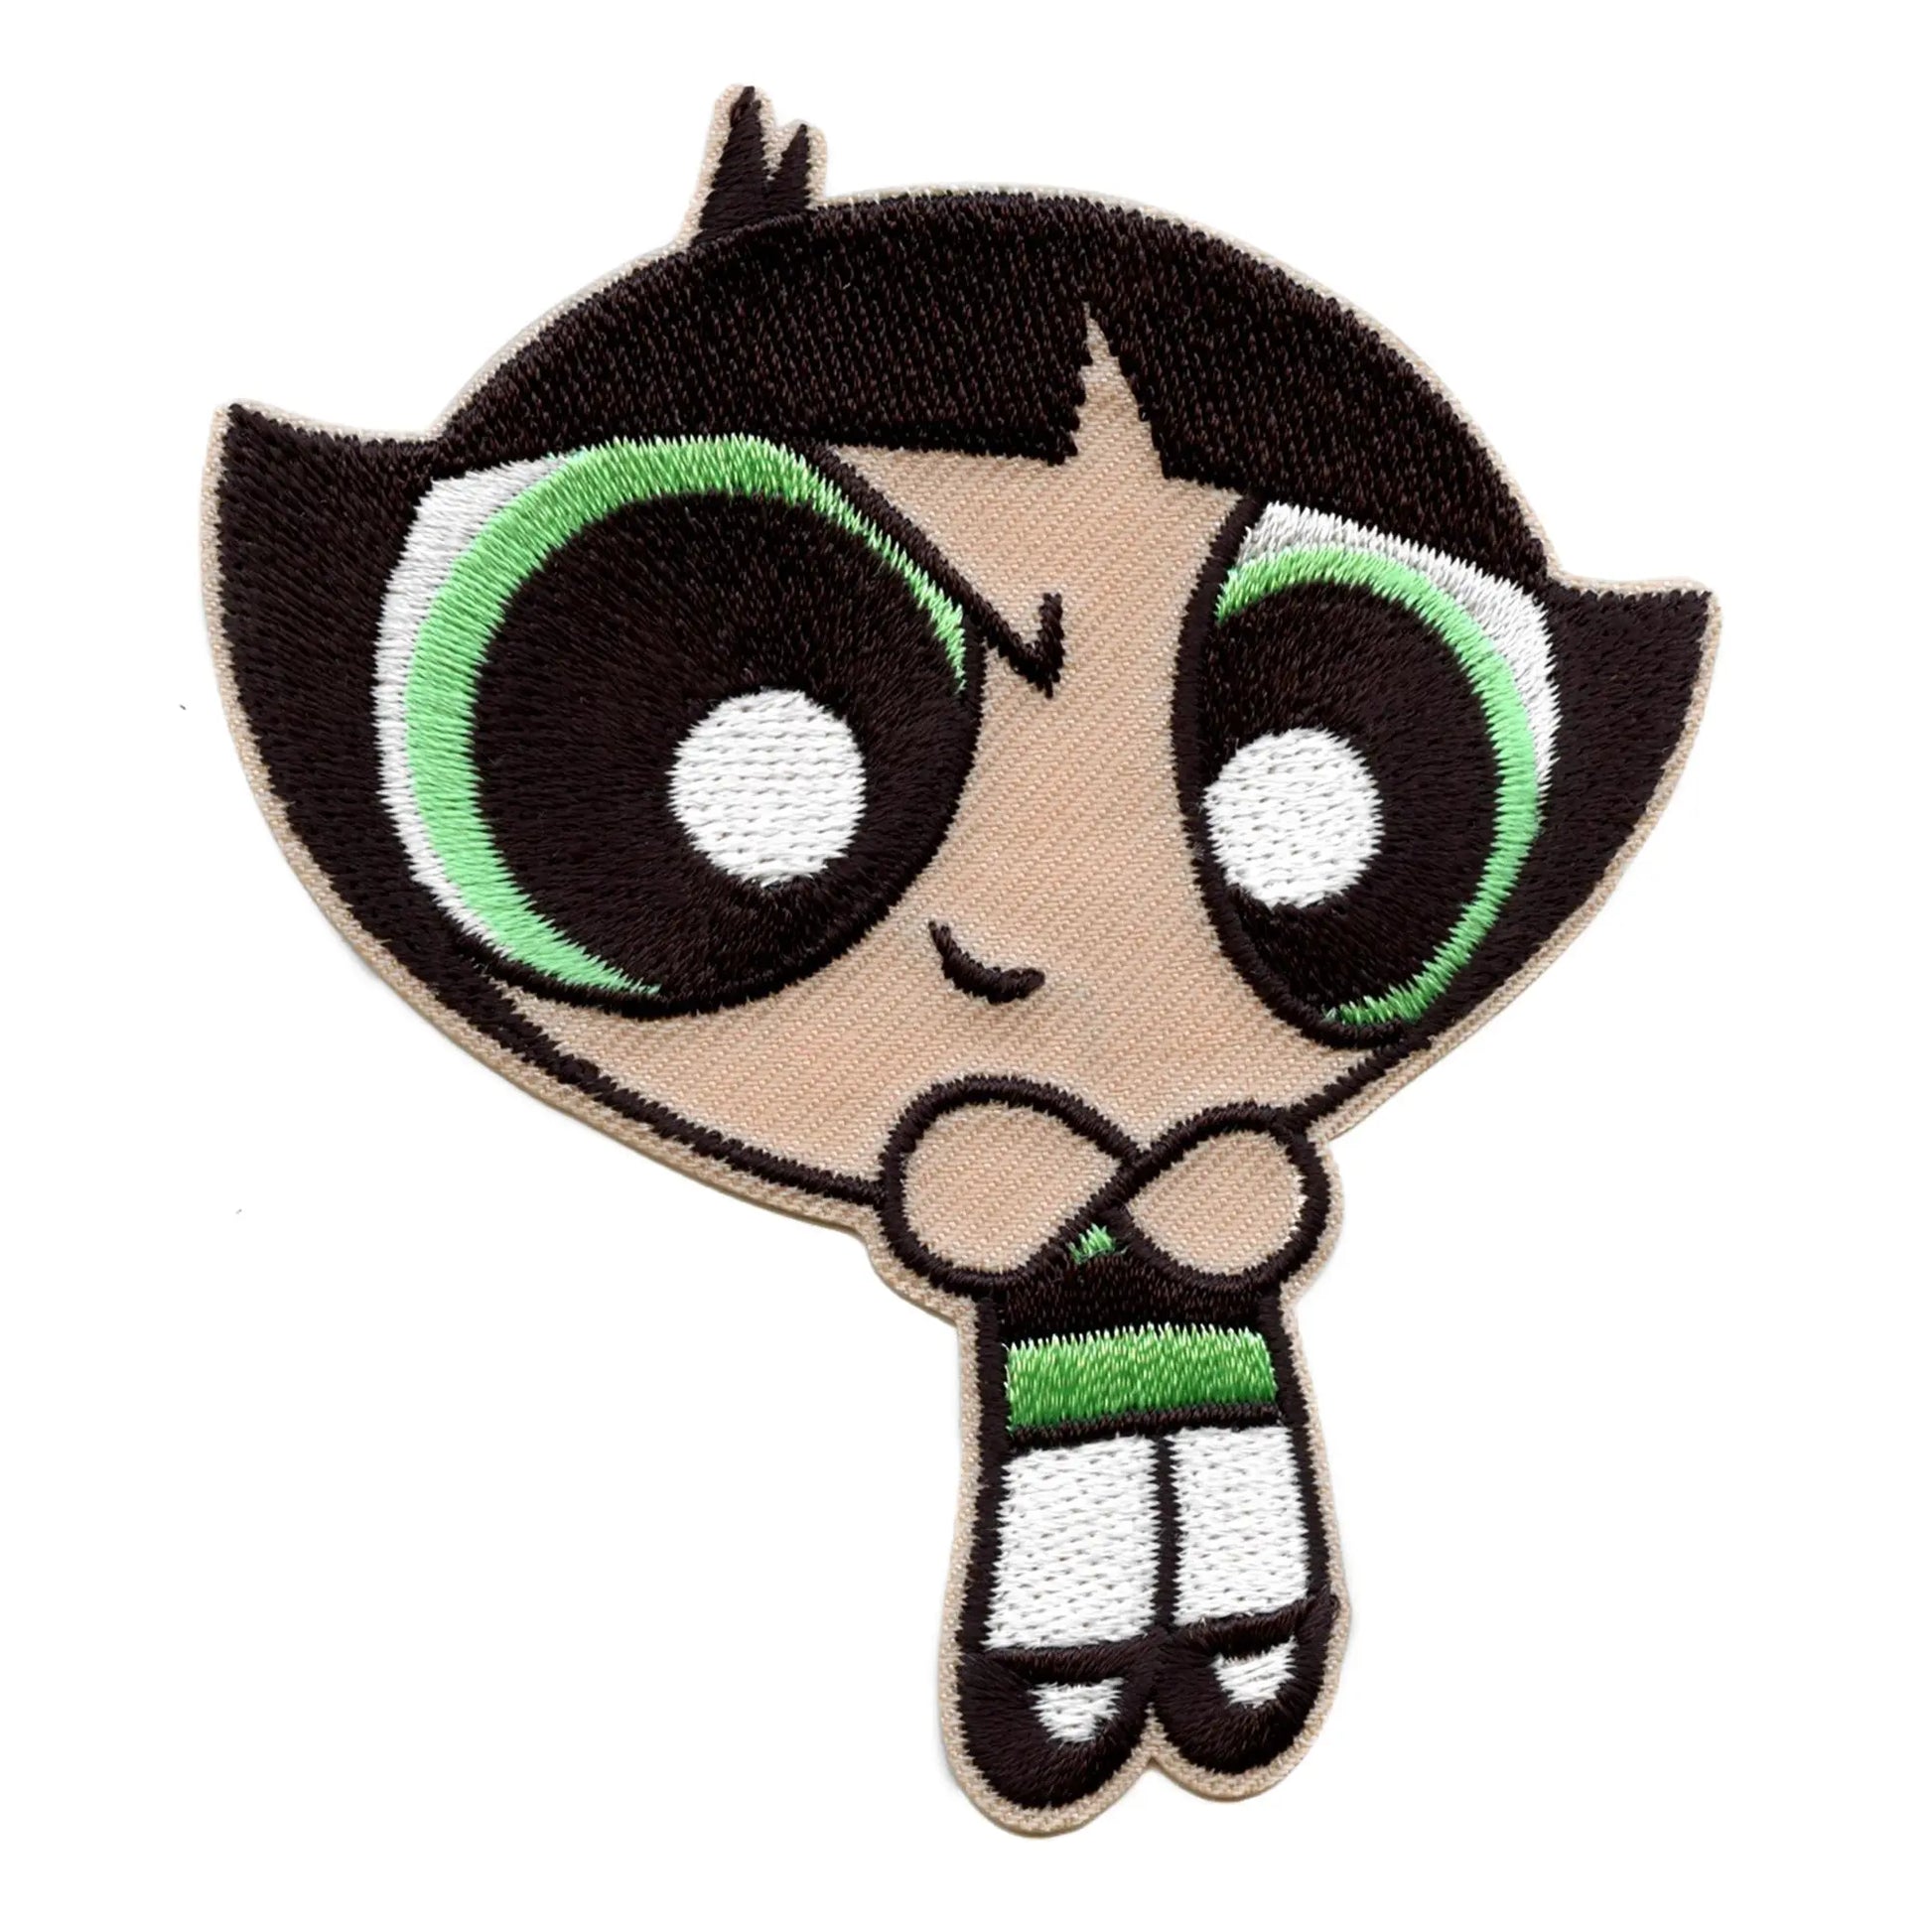 Powerpuff Girls Buttercup Patch Cartoon Network Animation Embroidered Iron On 